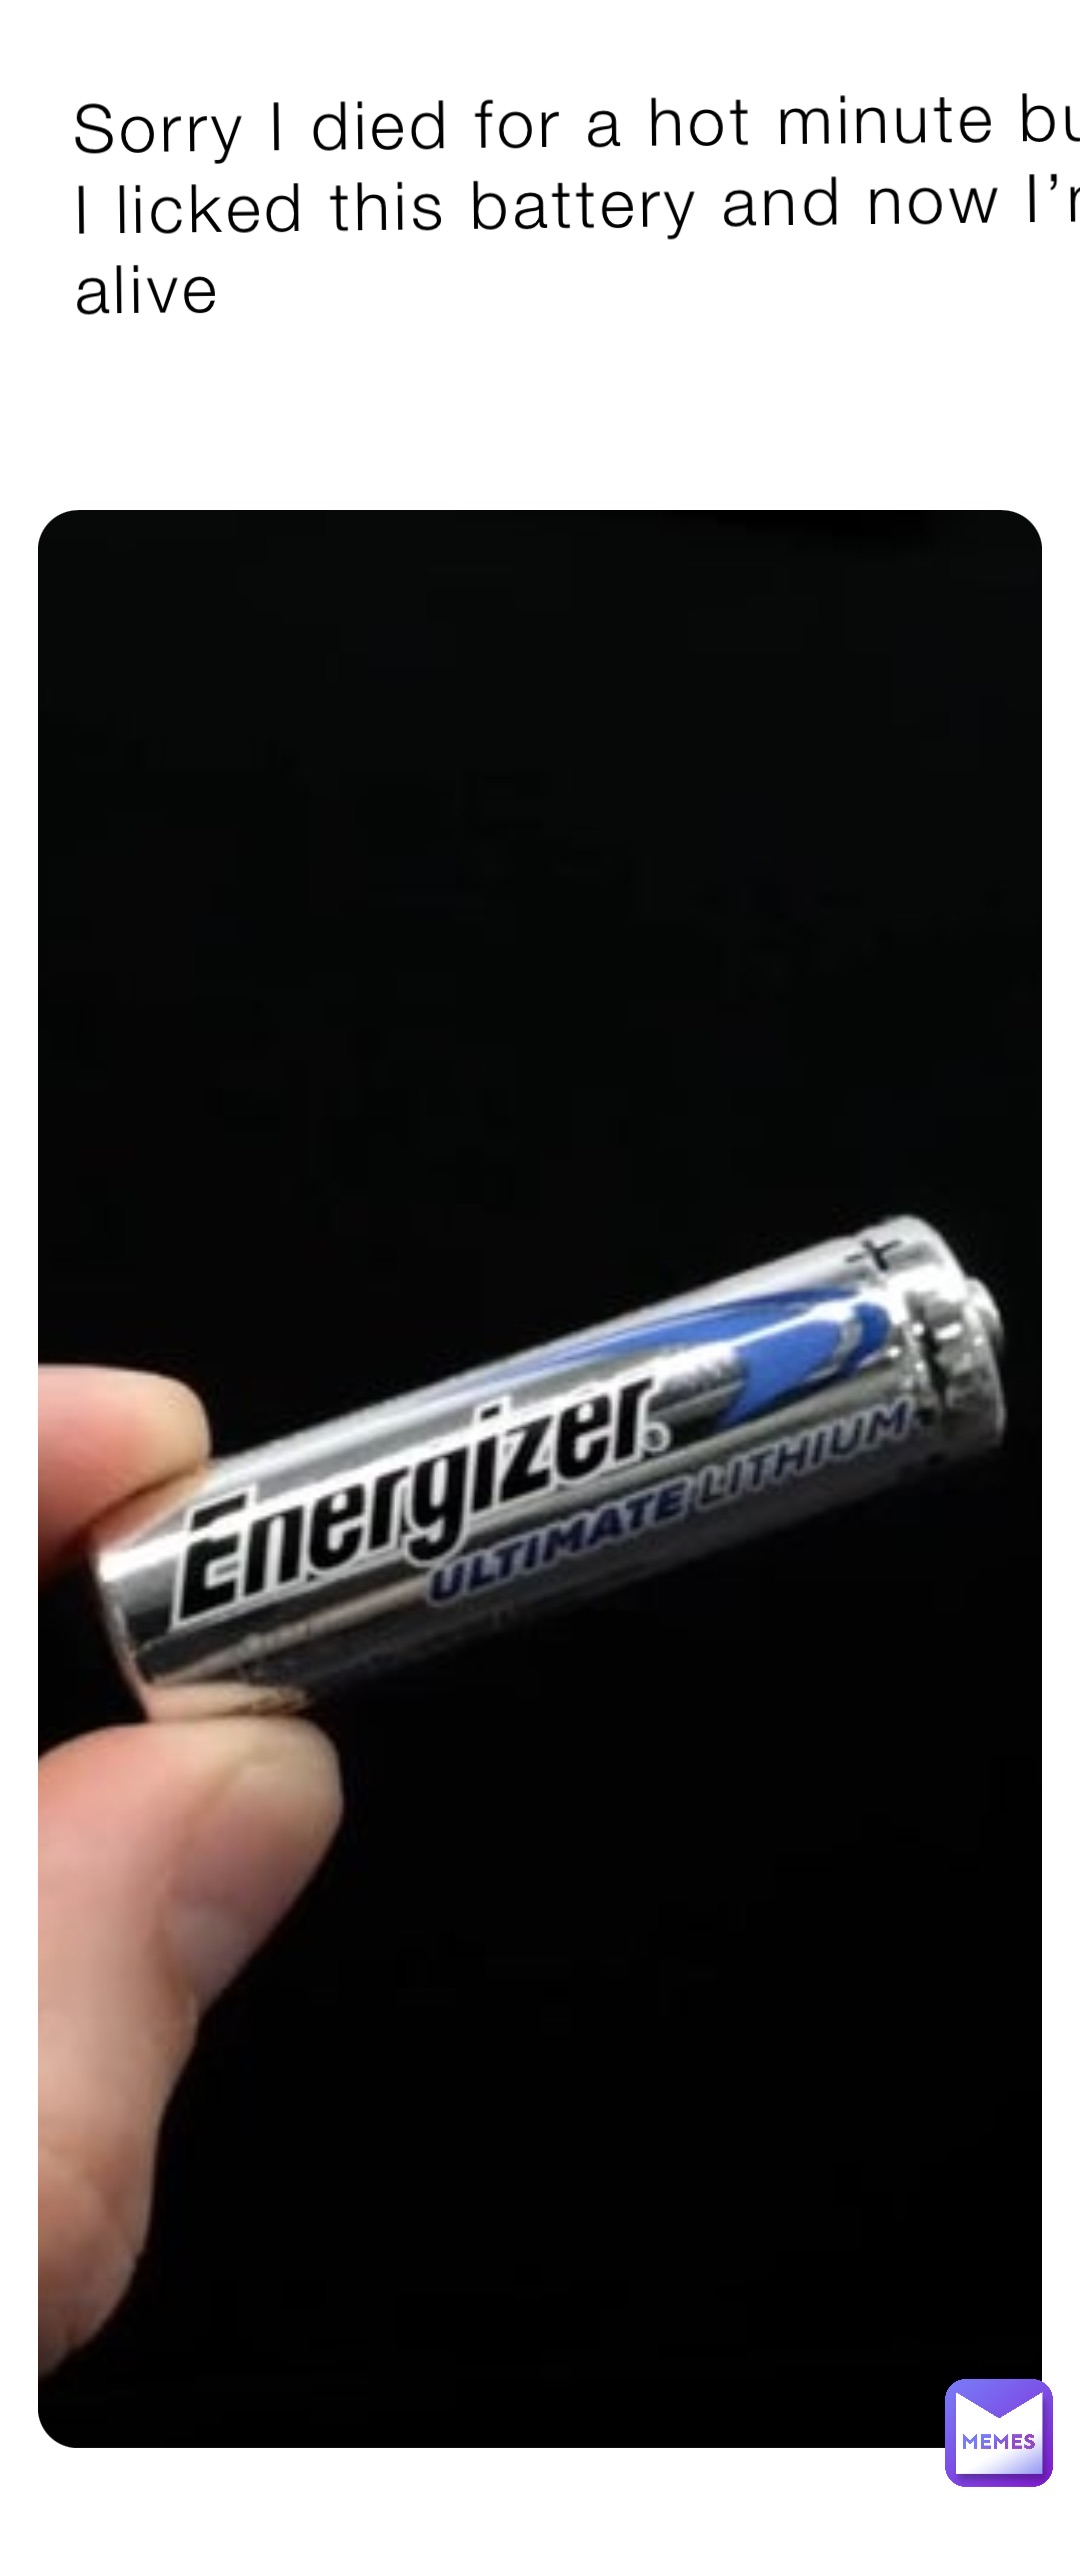 Sorry I died for a hot minute but I licked this battery and now I’m alive